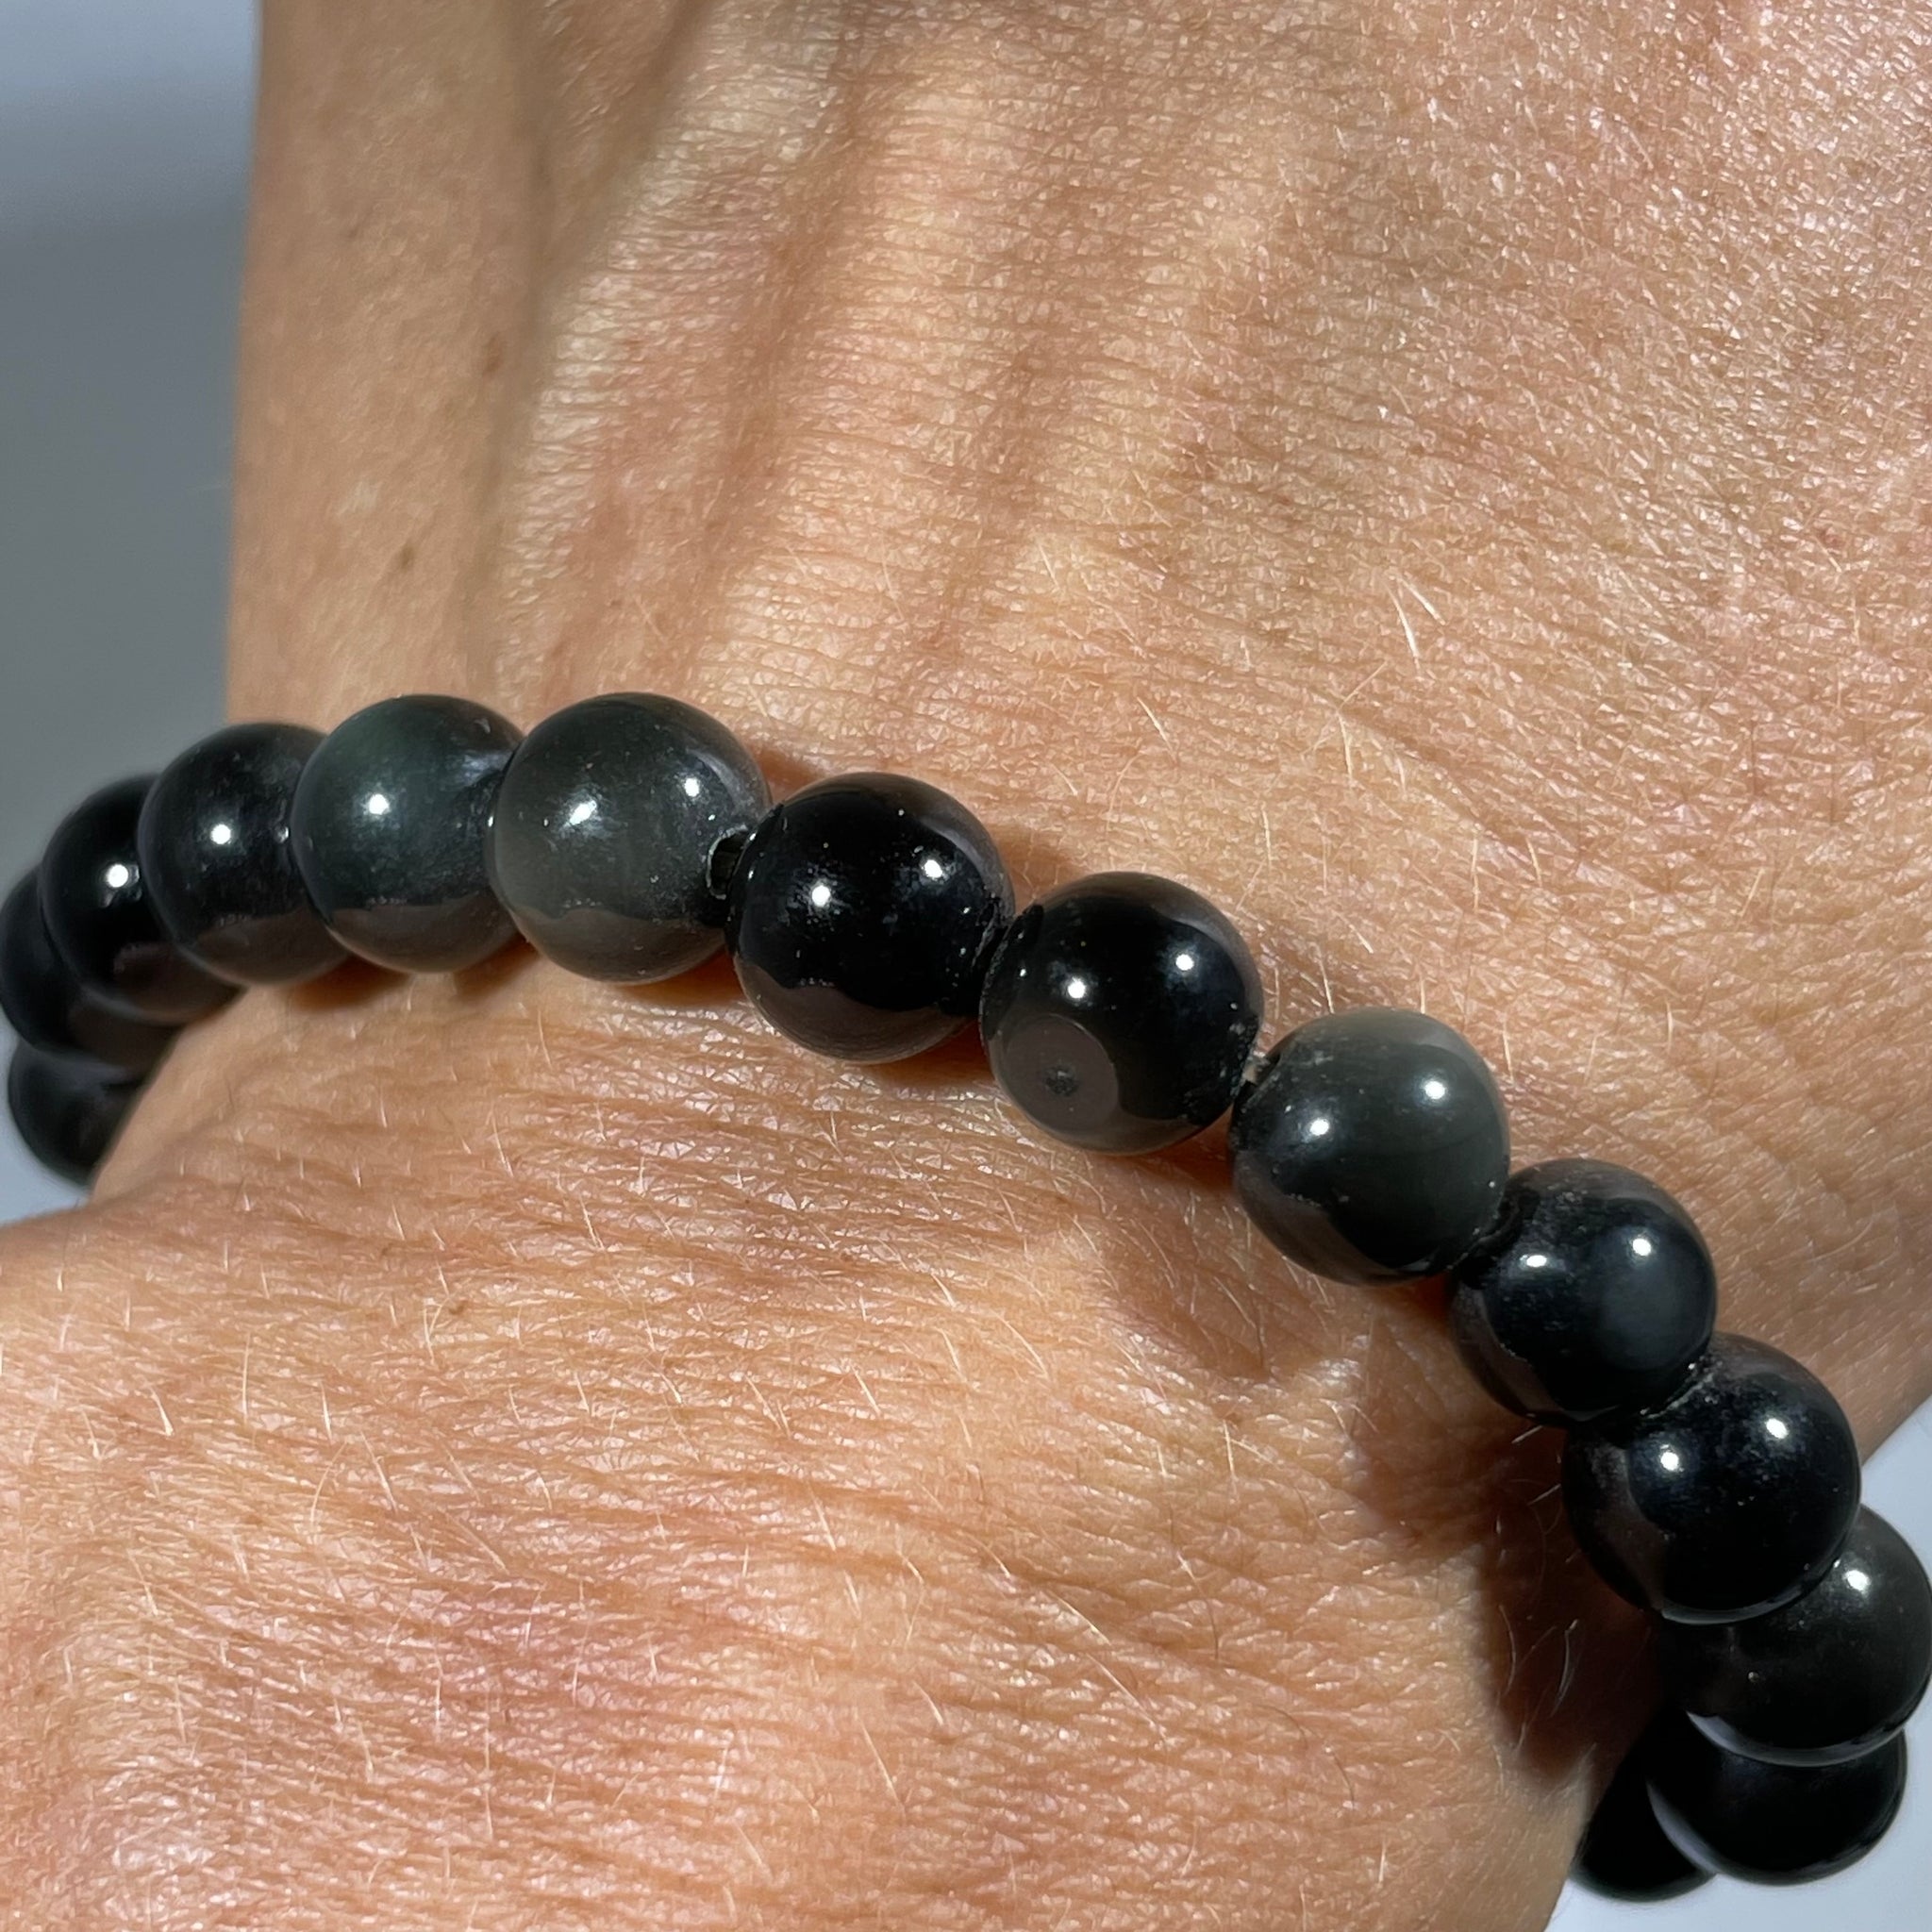 Buy BELLAROSA GEMS Crystal Collection Feng Shui Black Obsidian Pixiu|Om  mani Bracelet Wealth Good Luck Dragon with Gold Plated Pi Xiu/Pi Yao  Attract Luck and Wealth. (15 Beads) at Amazon.in